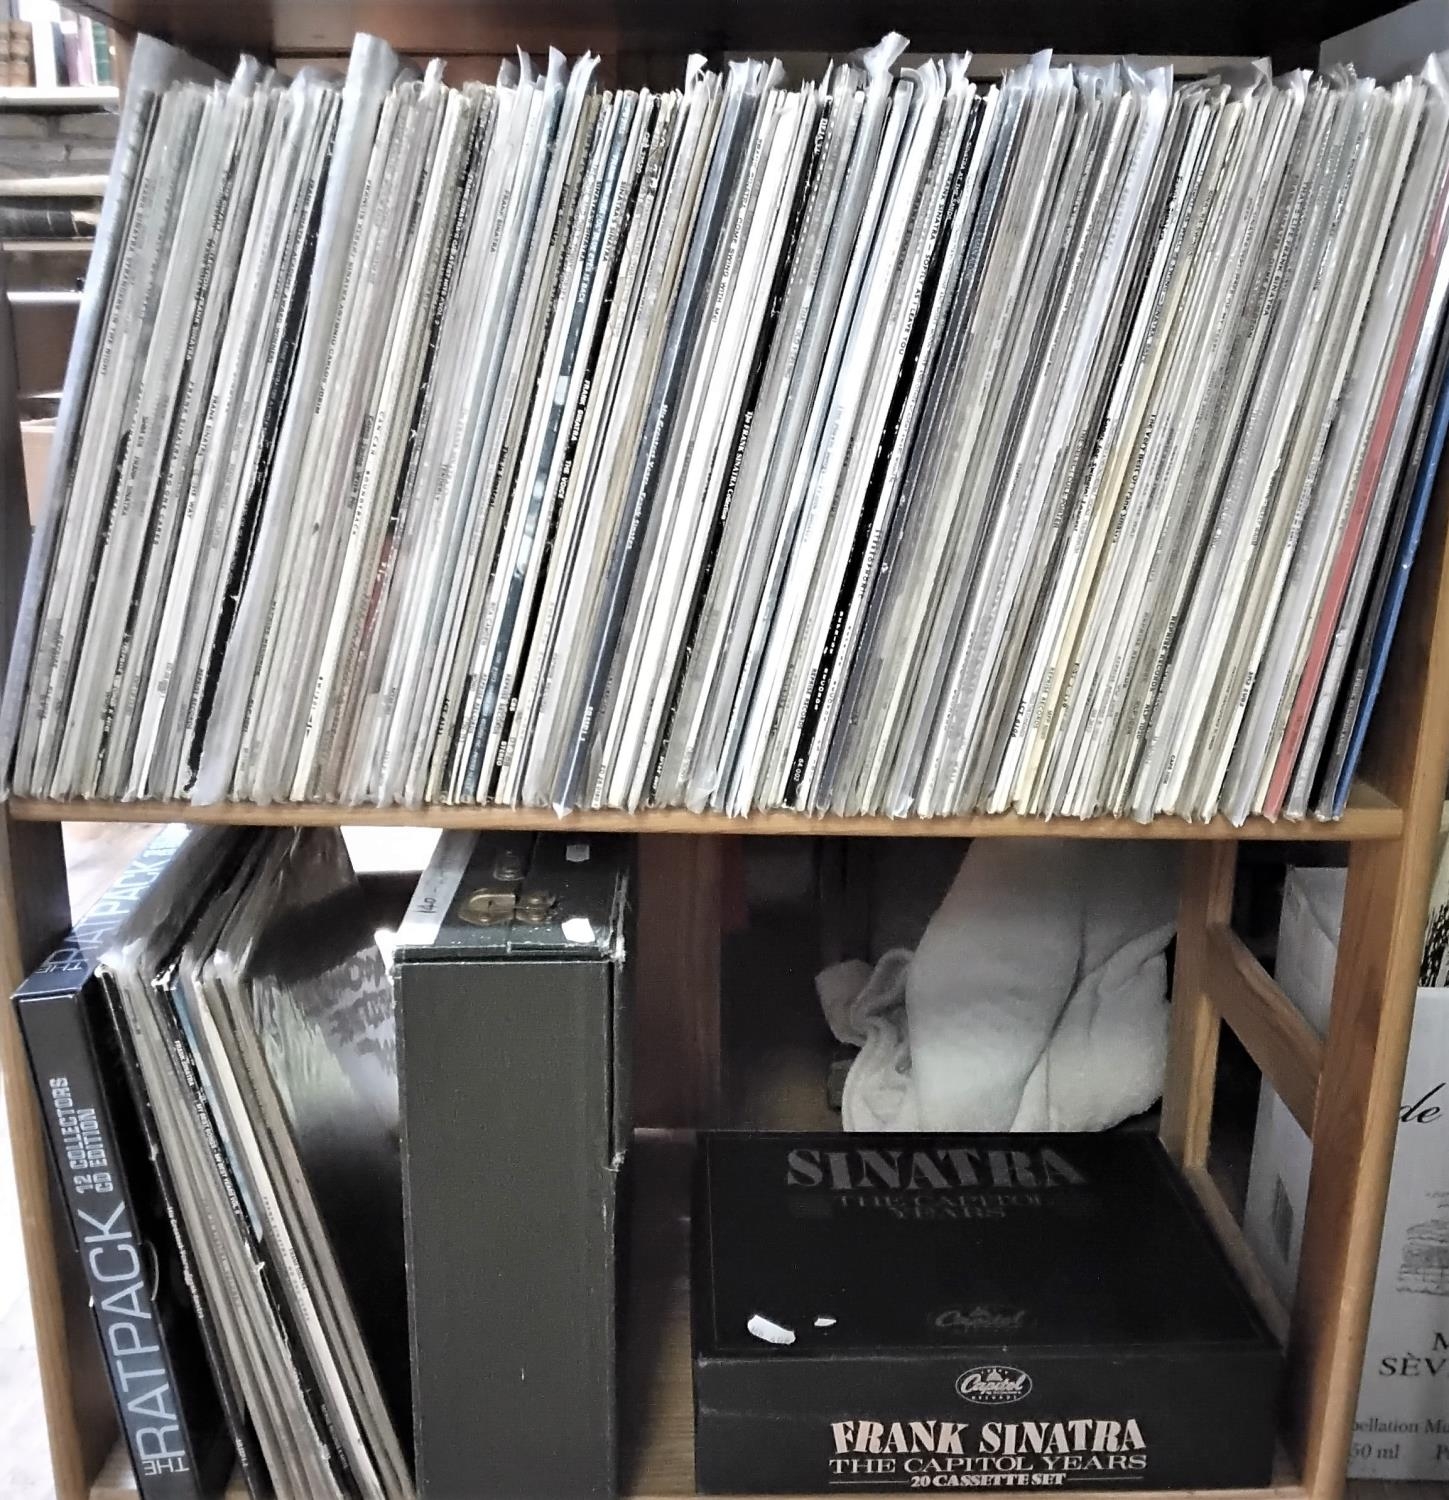 An extensive collection of Frank Sinatra vinyl LP's, CD's and cassettes, together with two Jazz